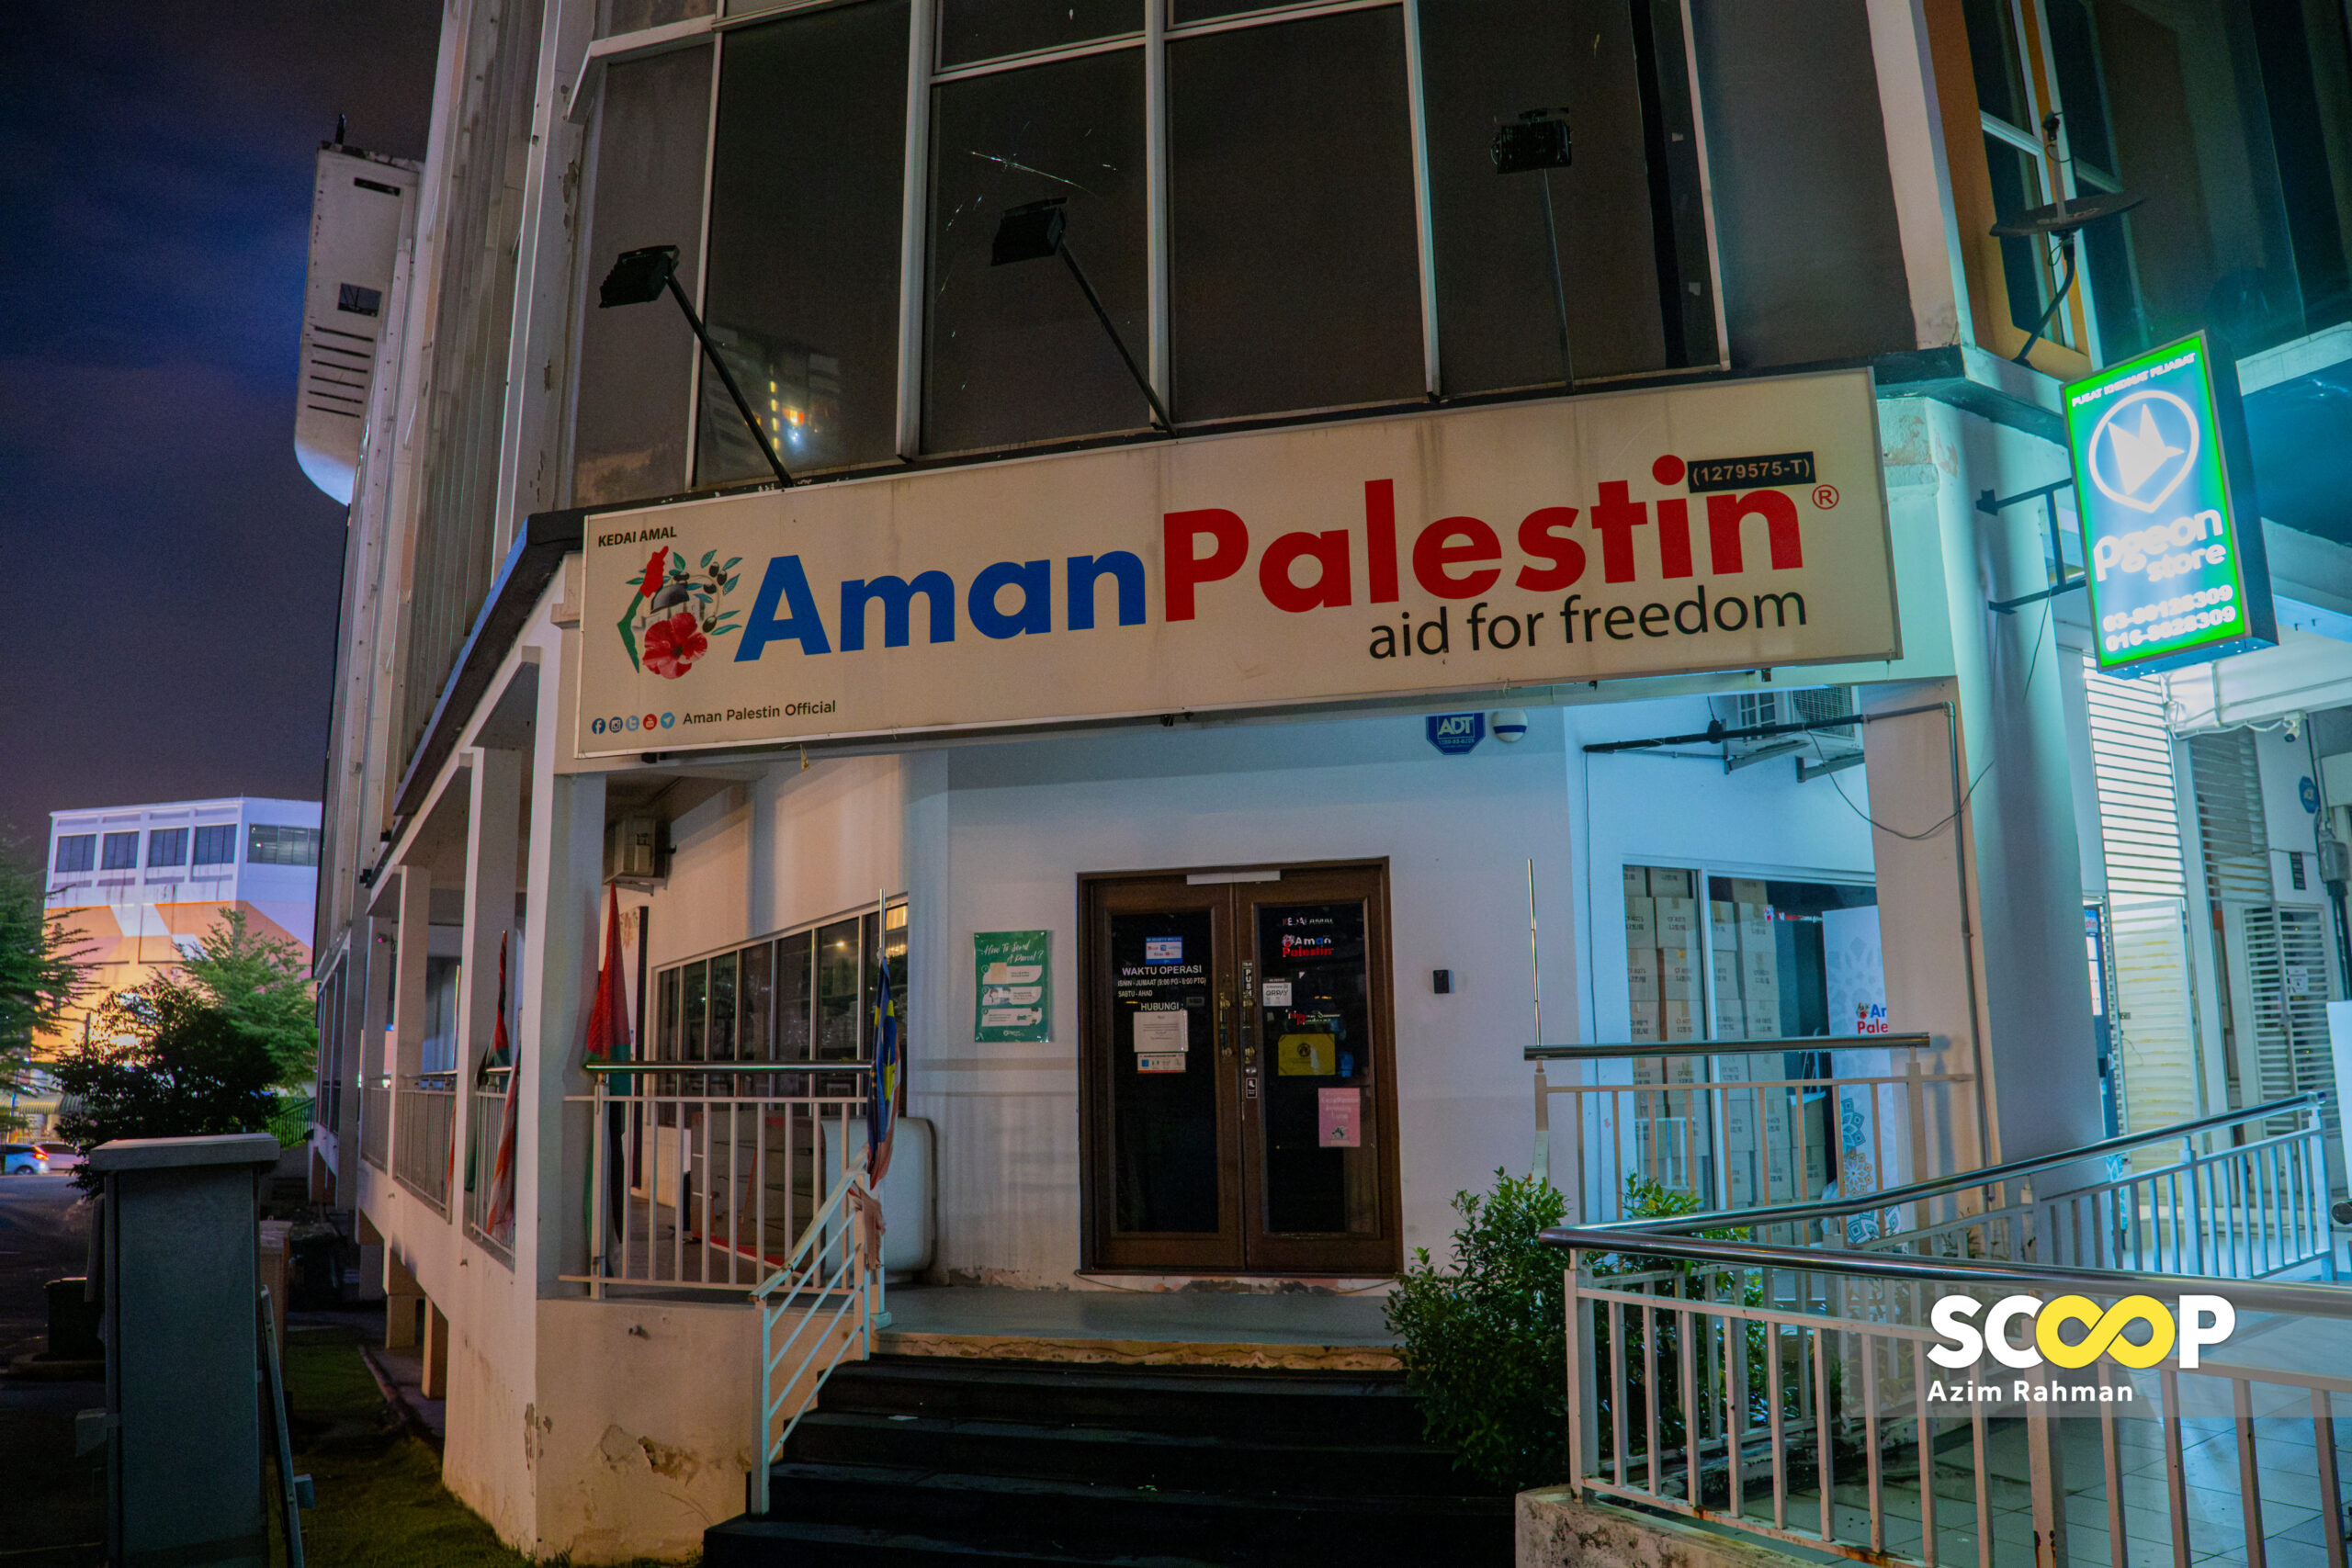 Is Kedai Amal Aman Palestin’s approach to philanthropy problematic?